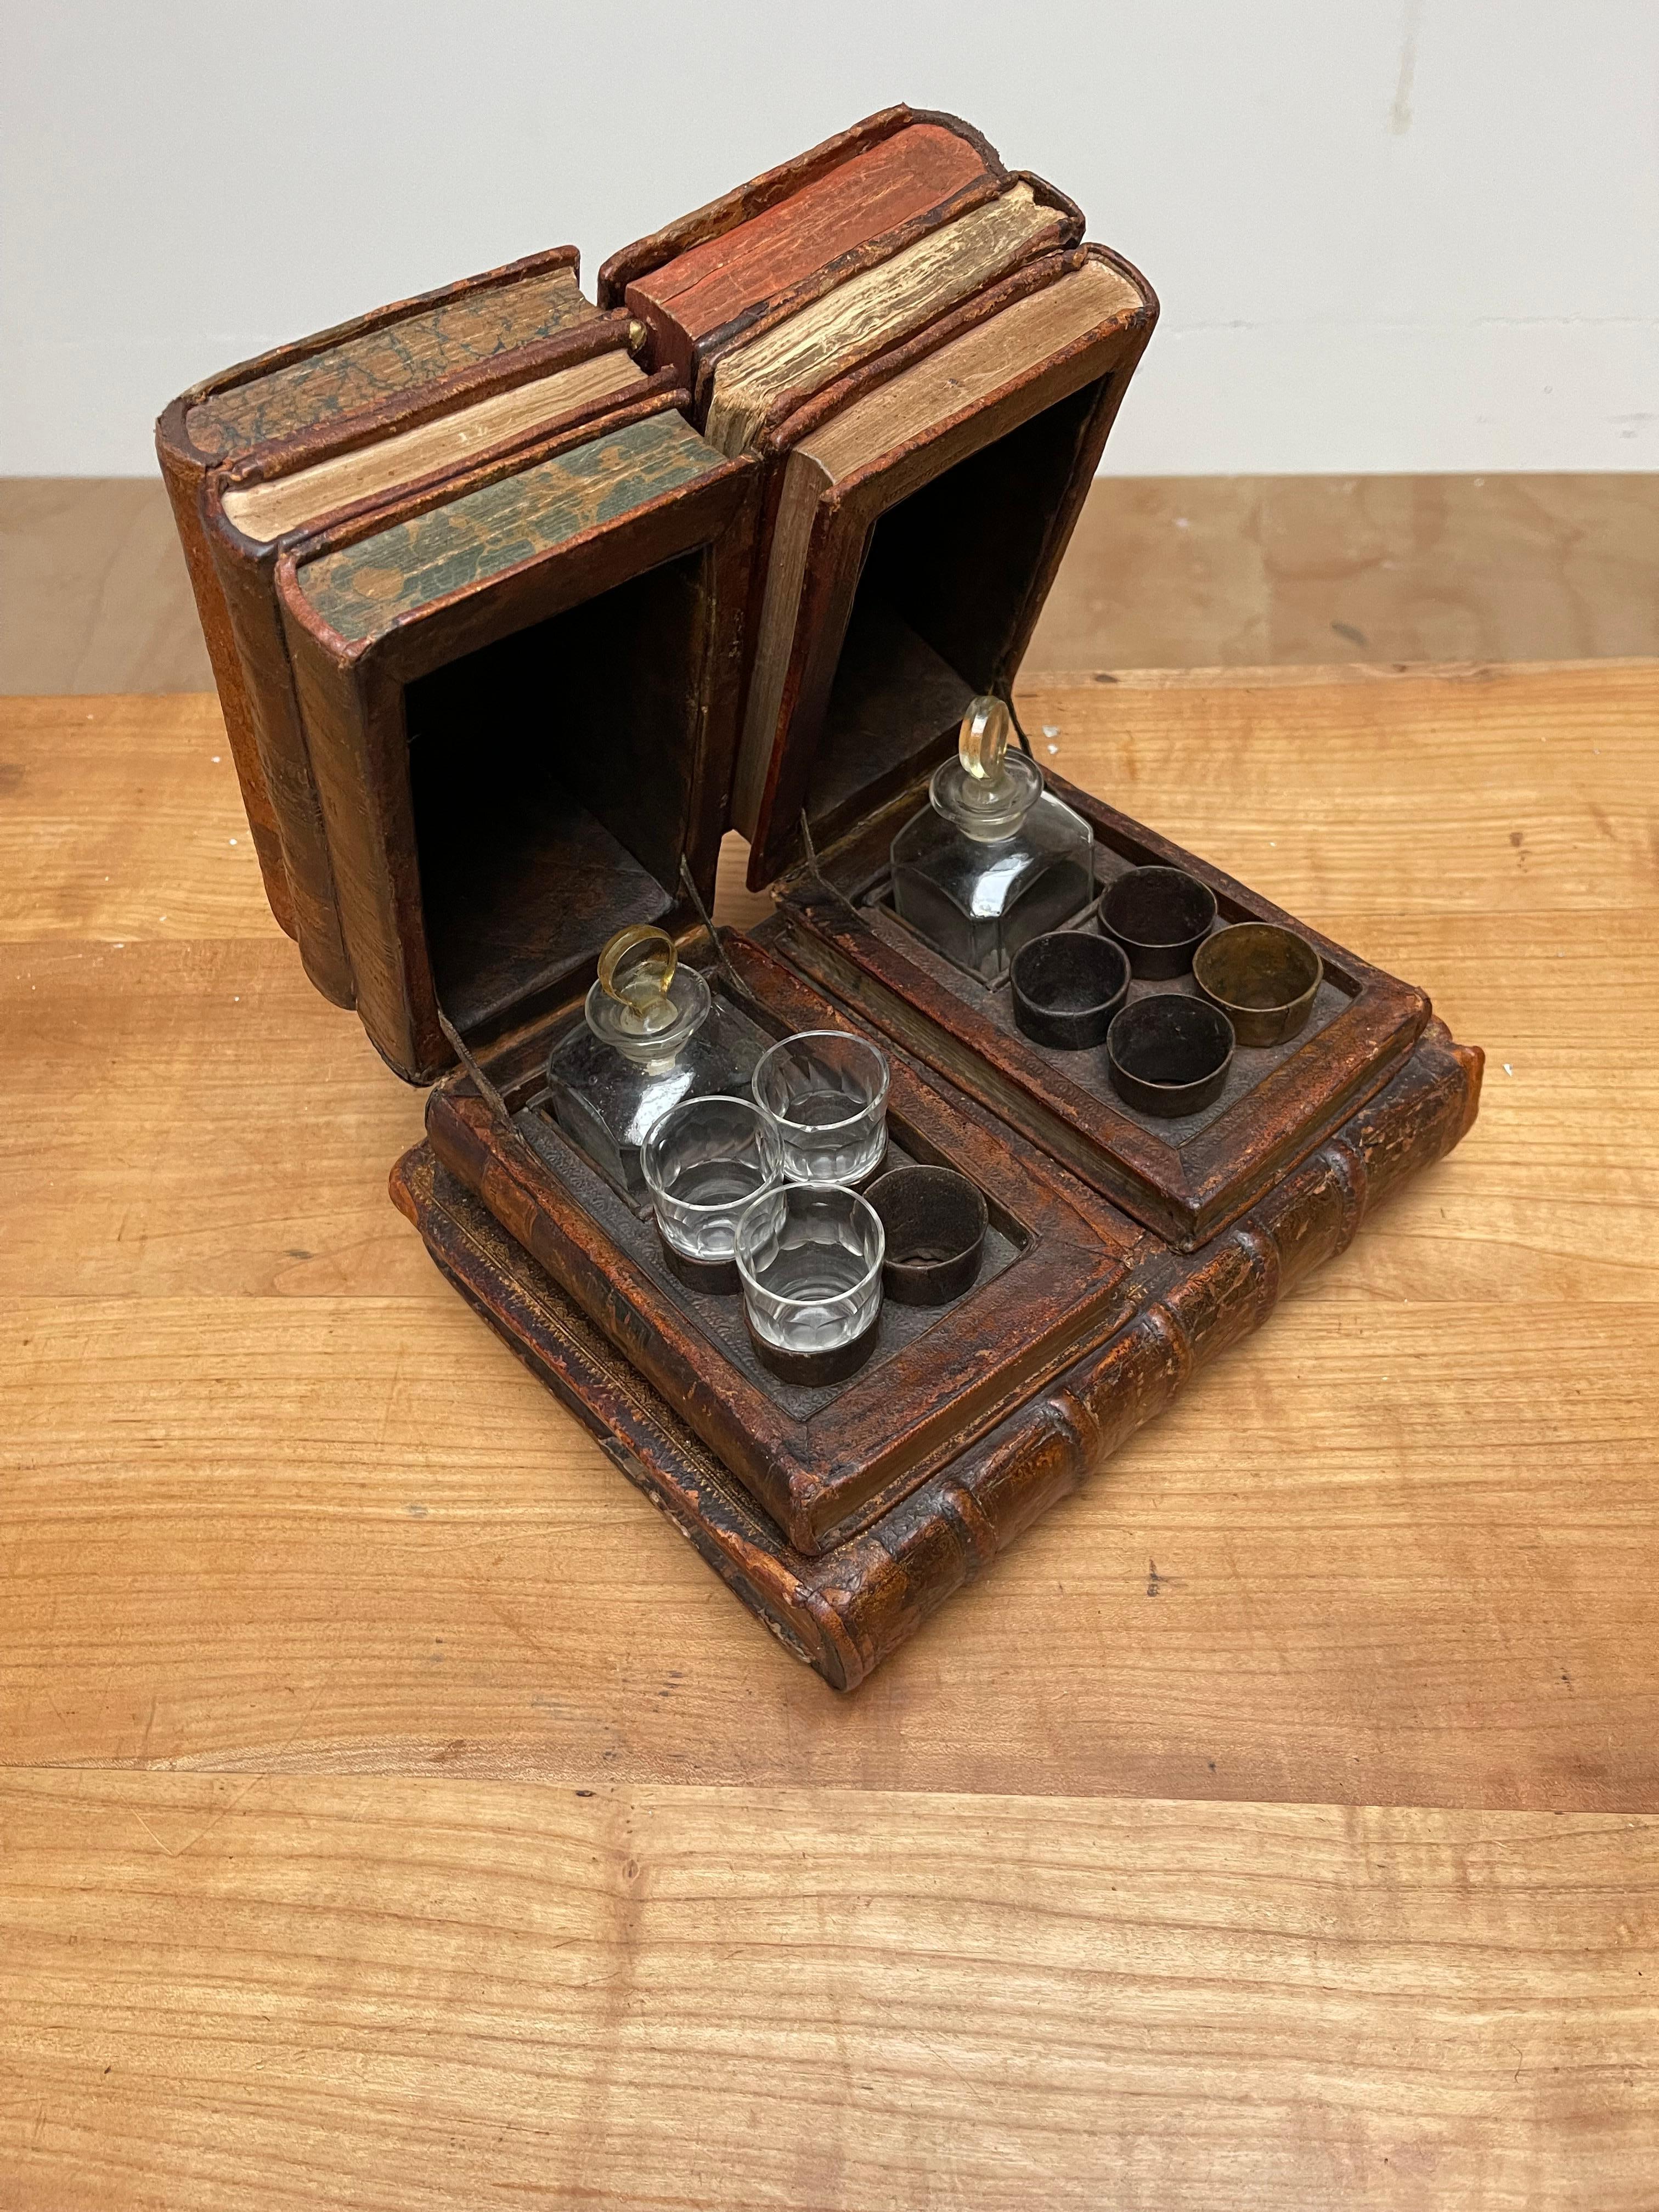 Etched Rare French Mid-1800s Liquor Tantalus Drinks Box w. Two Stacks of Leather Books